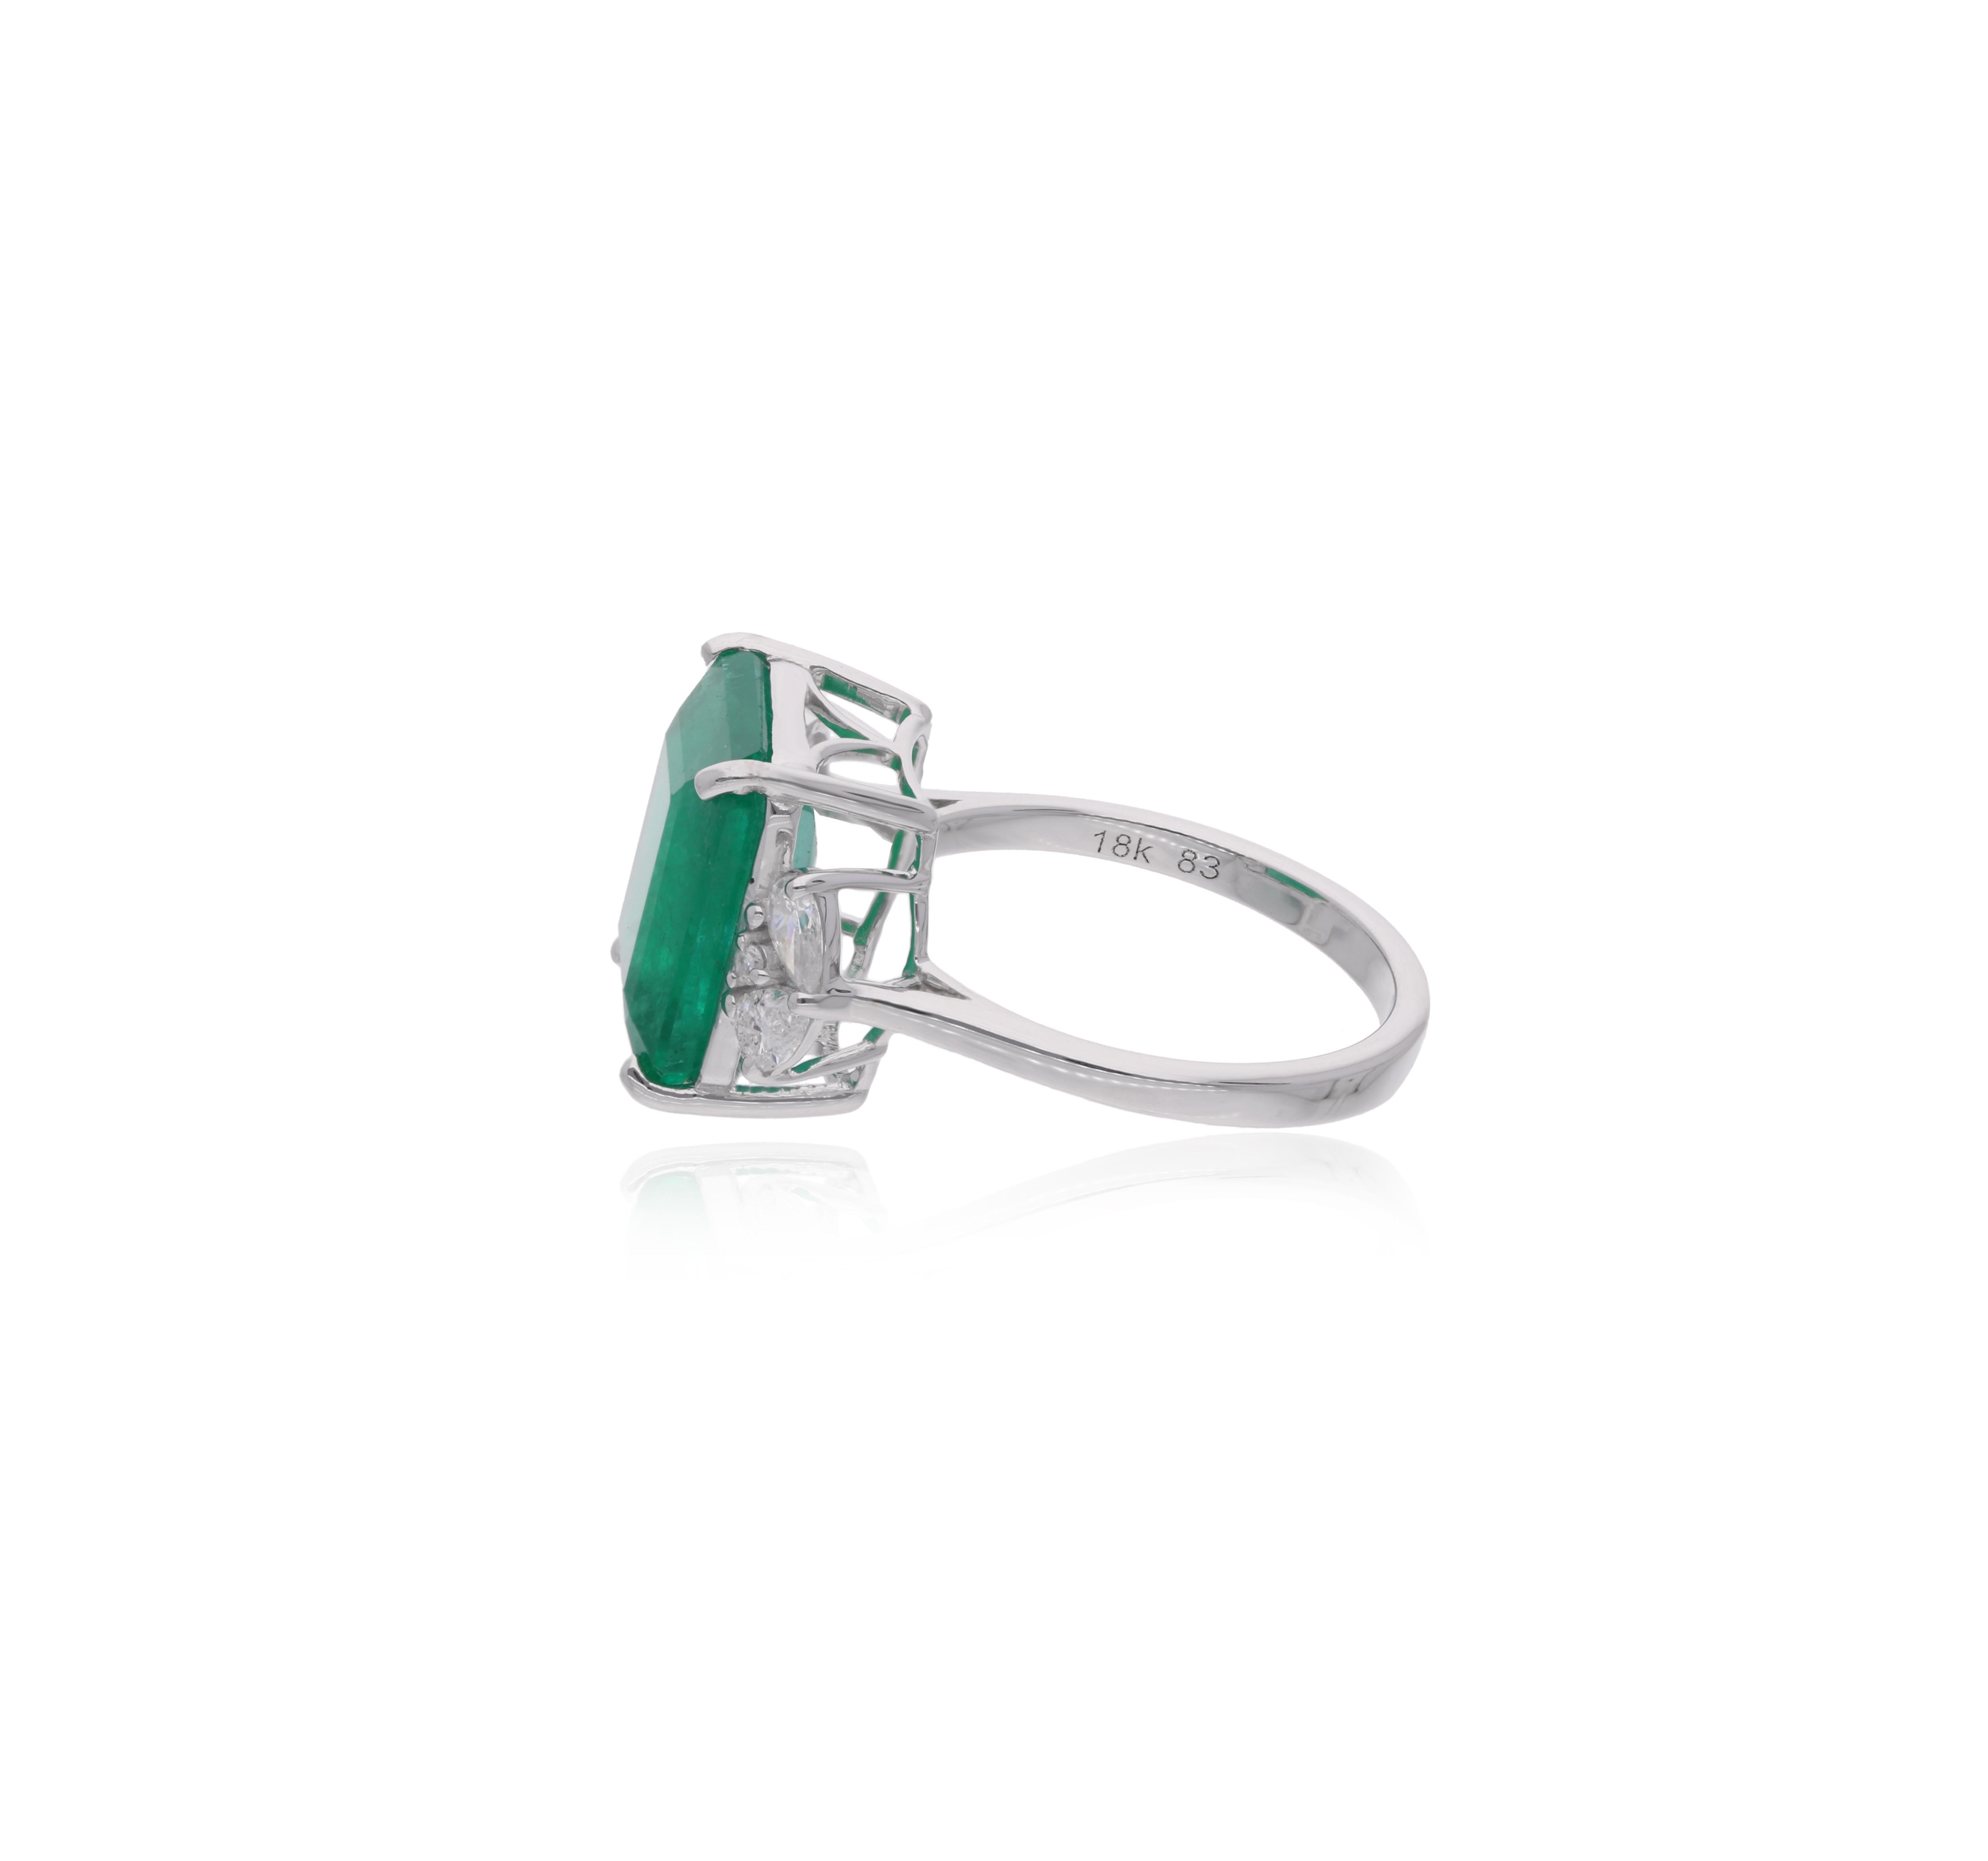 Handcrafted with care and precision, this ring features a stunning 6.24 ct. Emerald Cut Zambian Emerald at its center, surrounded by 2 Pear shape Diamonds on each side. 18k Rose Gold/White Gold/Yellow Gold.

This is a perfect Gift for Mom, Fiancée,